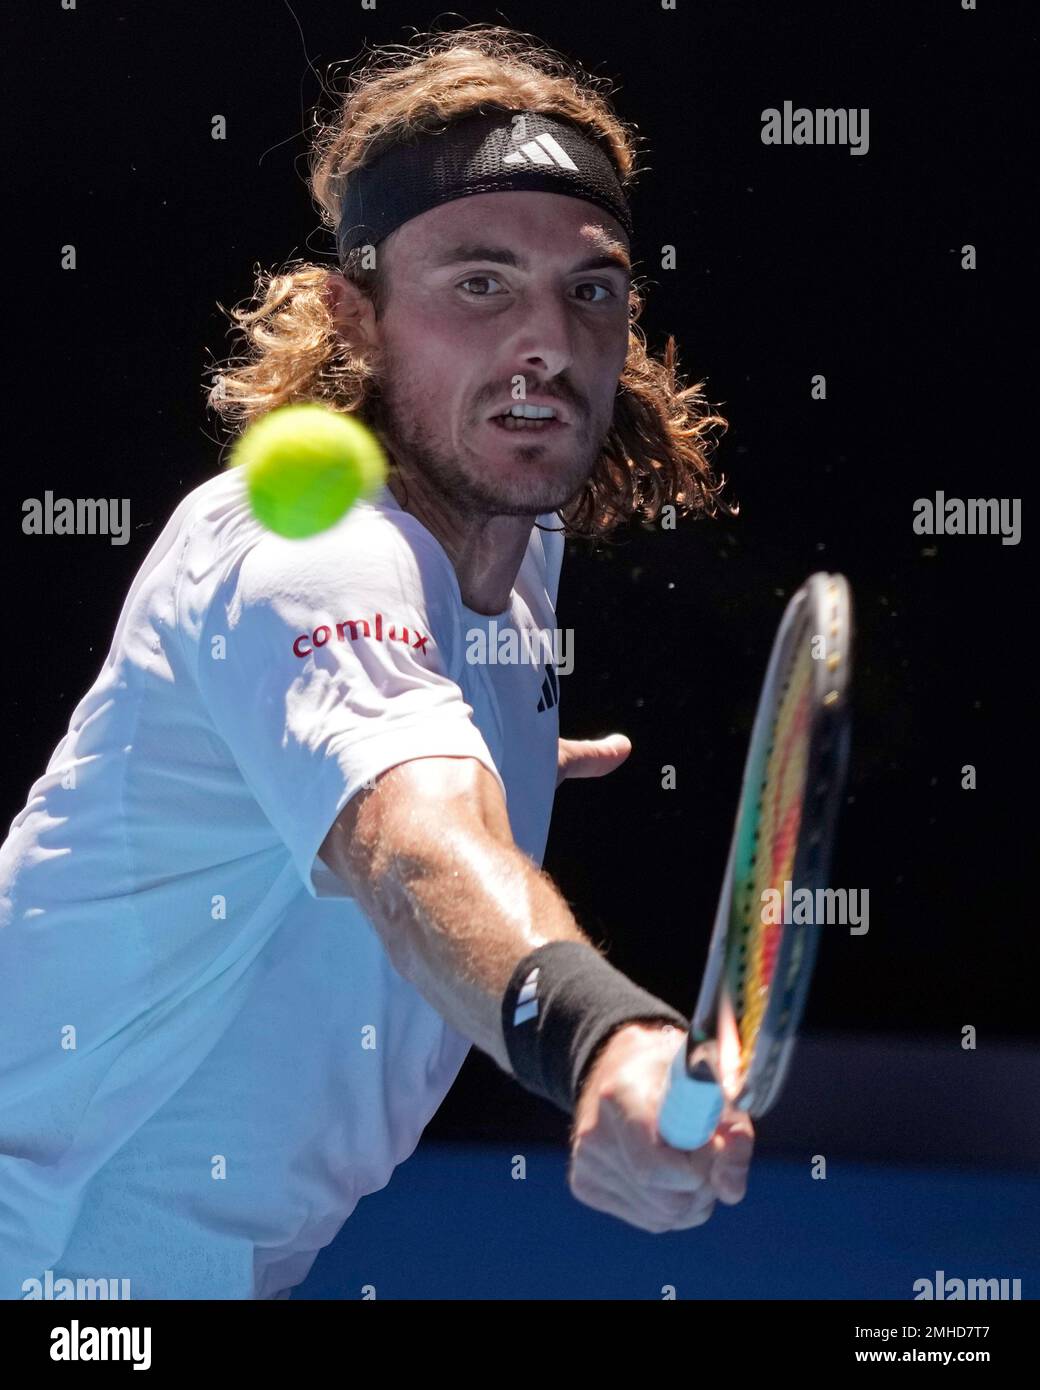 Stefanos Tsitsipas of Greece plays a backhand return to Karen Khachanov of Russia during their semifinal at the Australian Open tennis championship in Melbourne, Australia, Friday, Jan